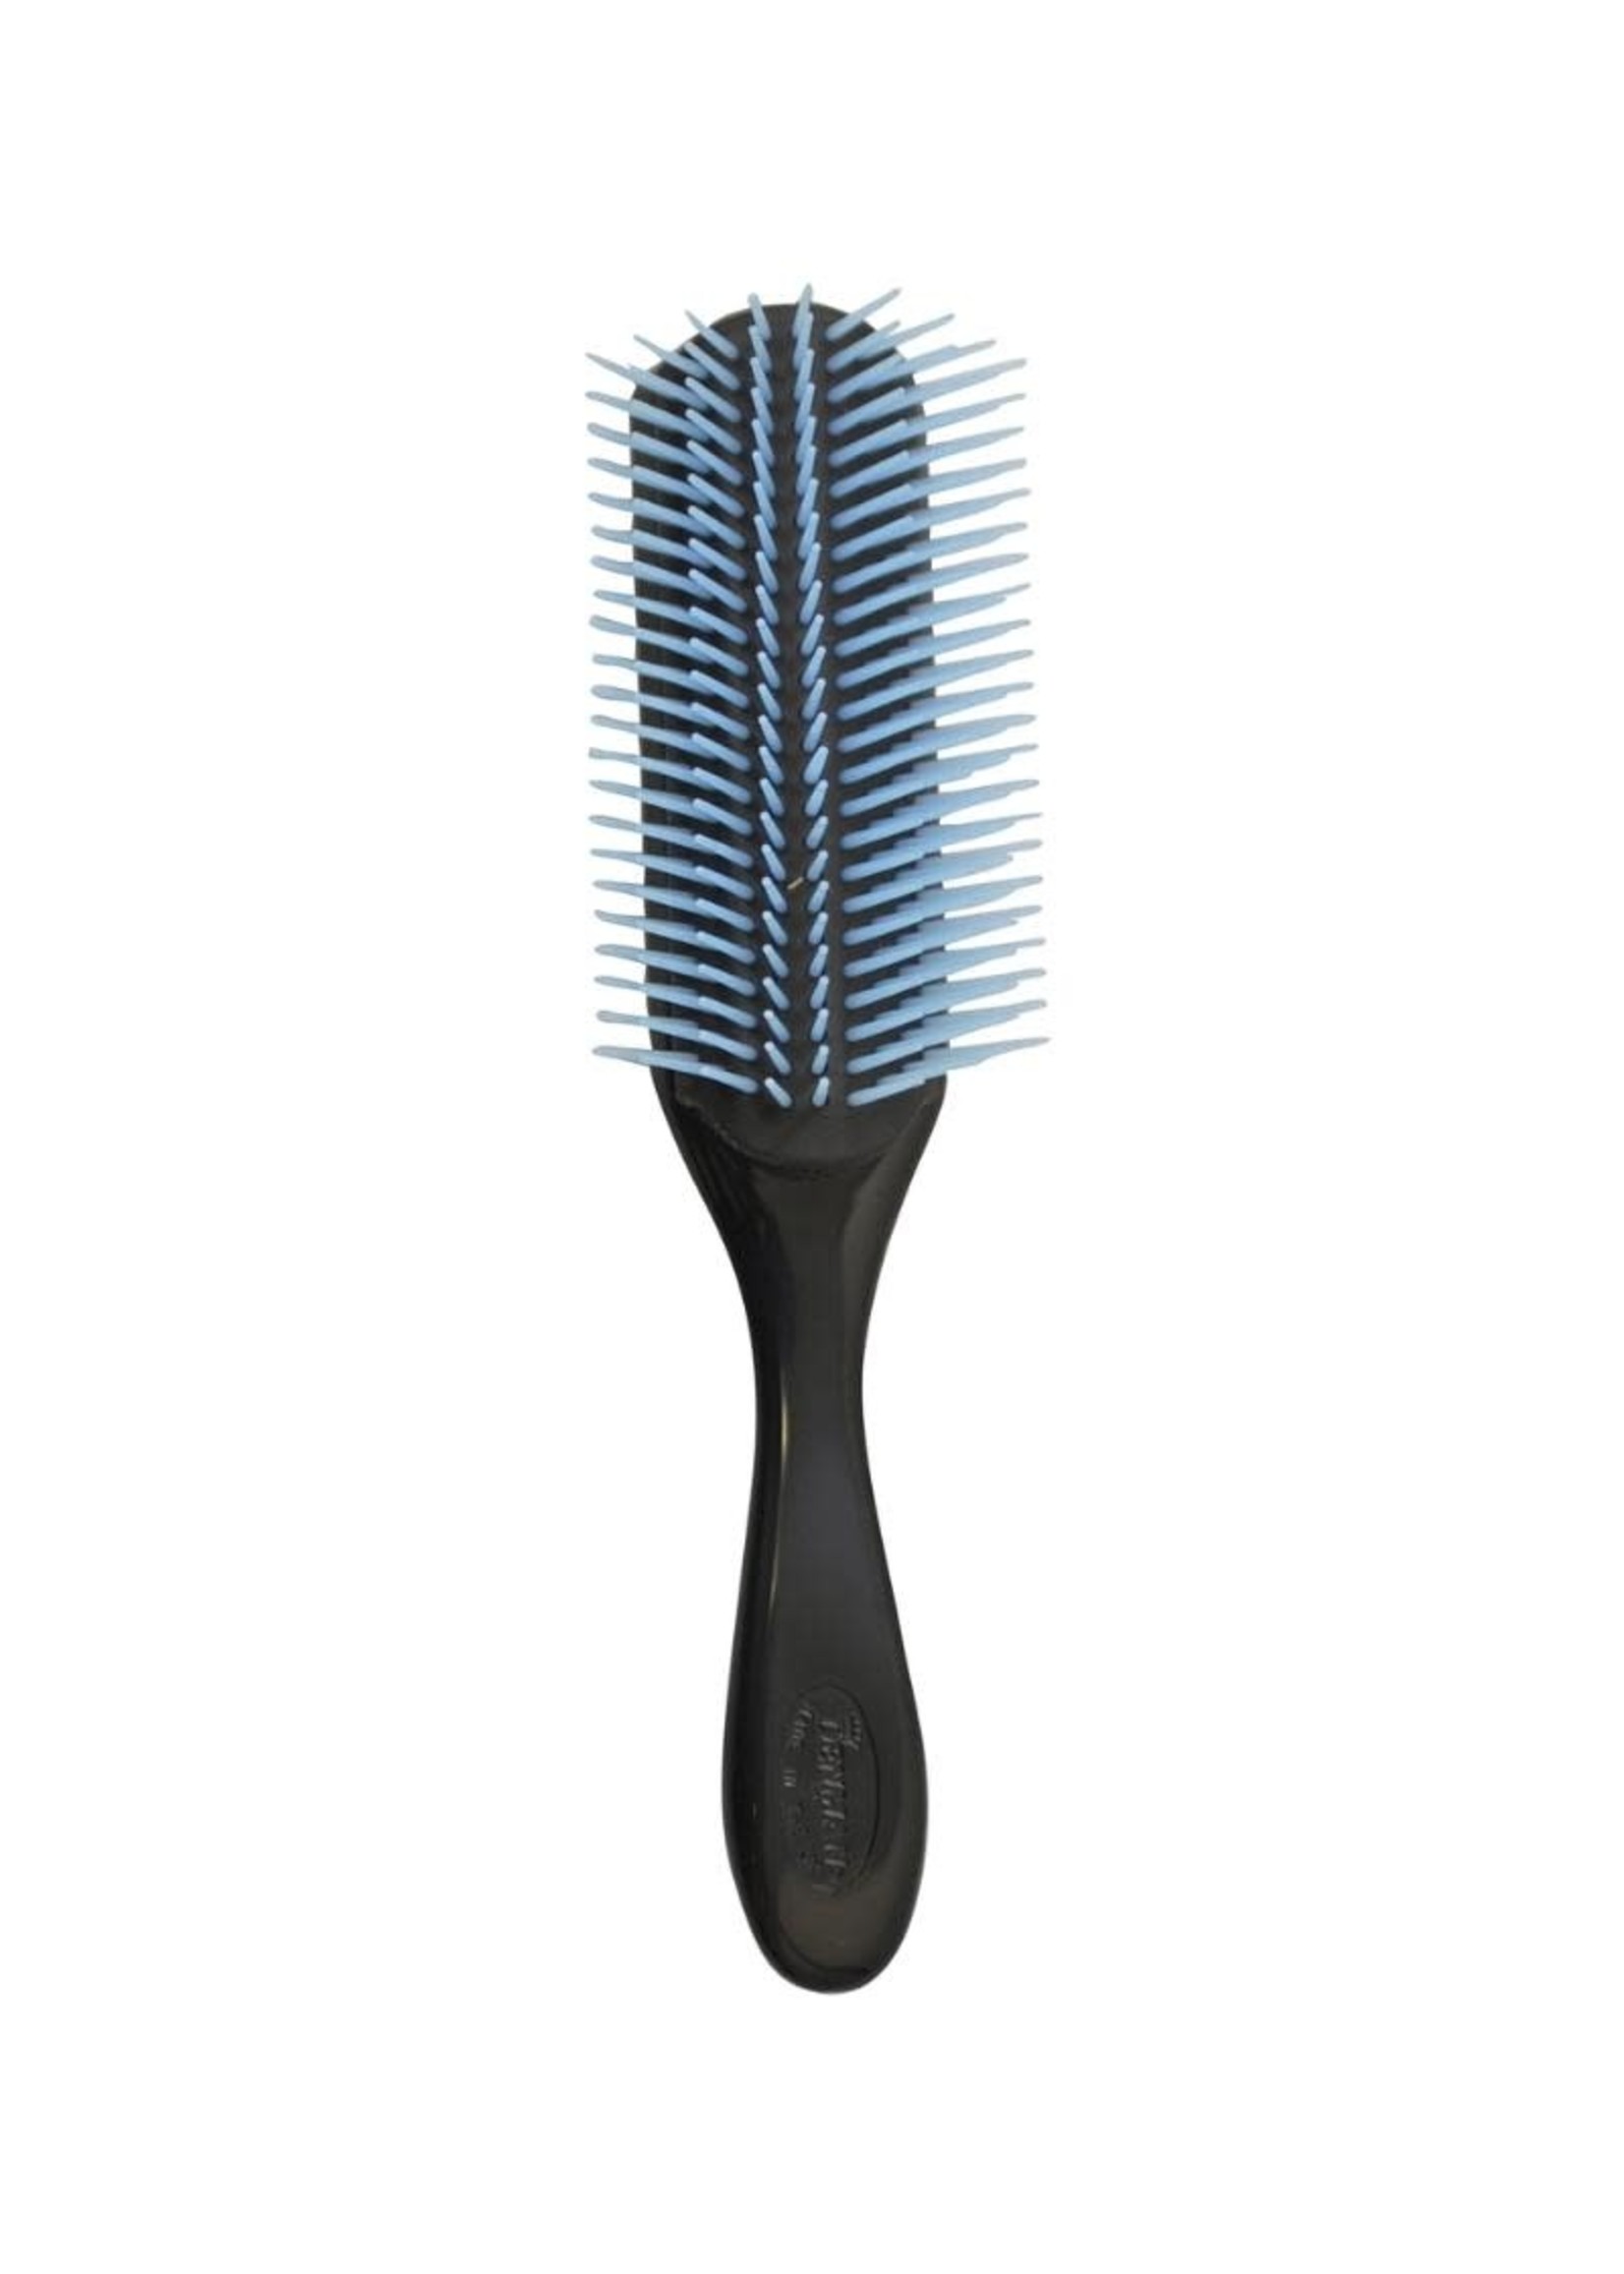 Denman Denman D4 9 Row Styling Brush Large - Black with Blue Pins